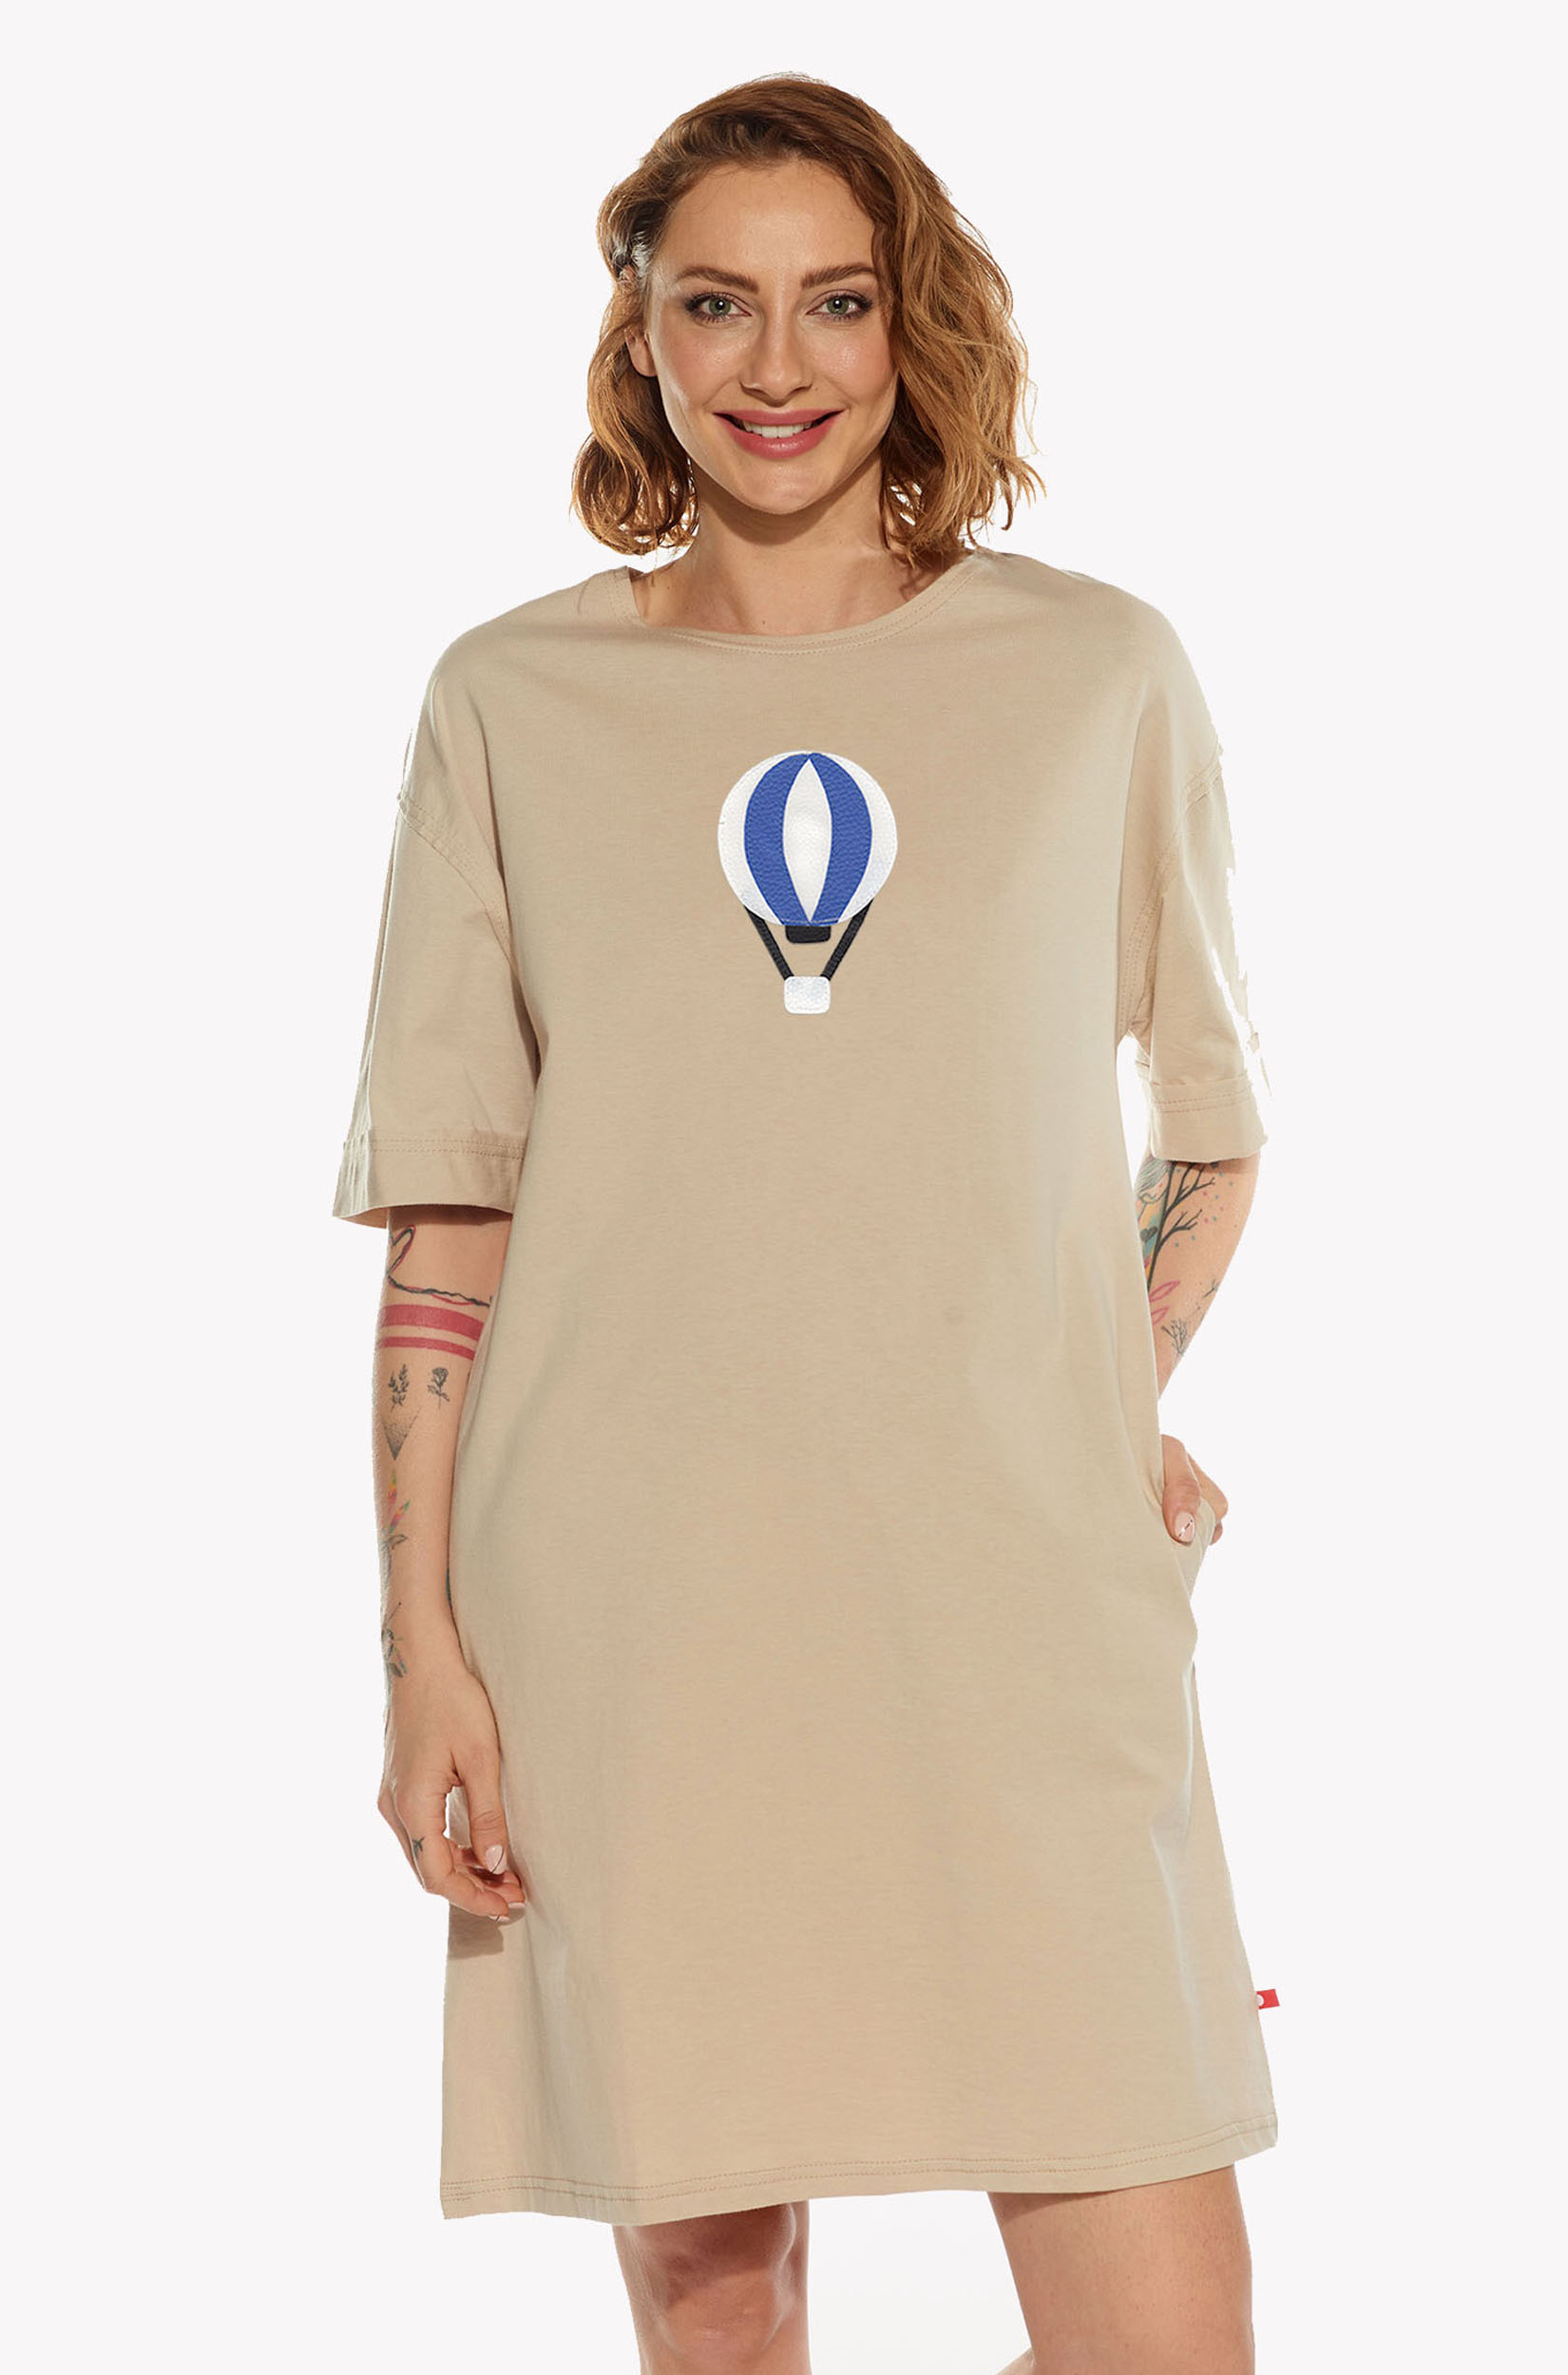 Dresses with airship